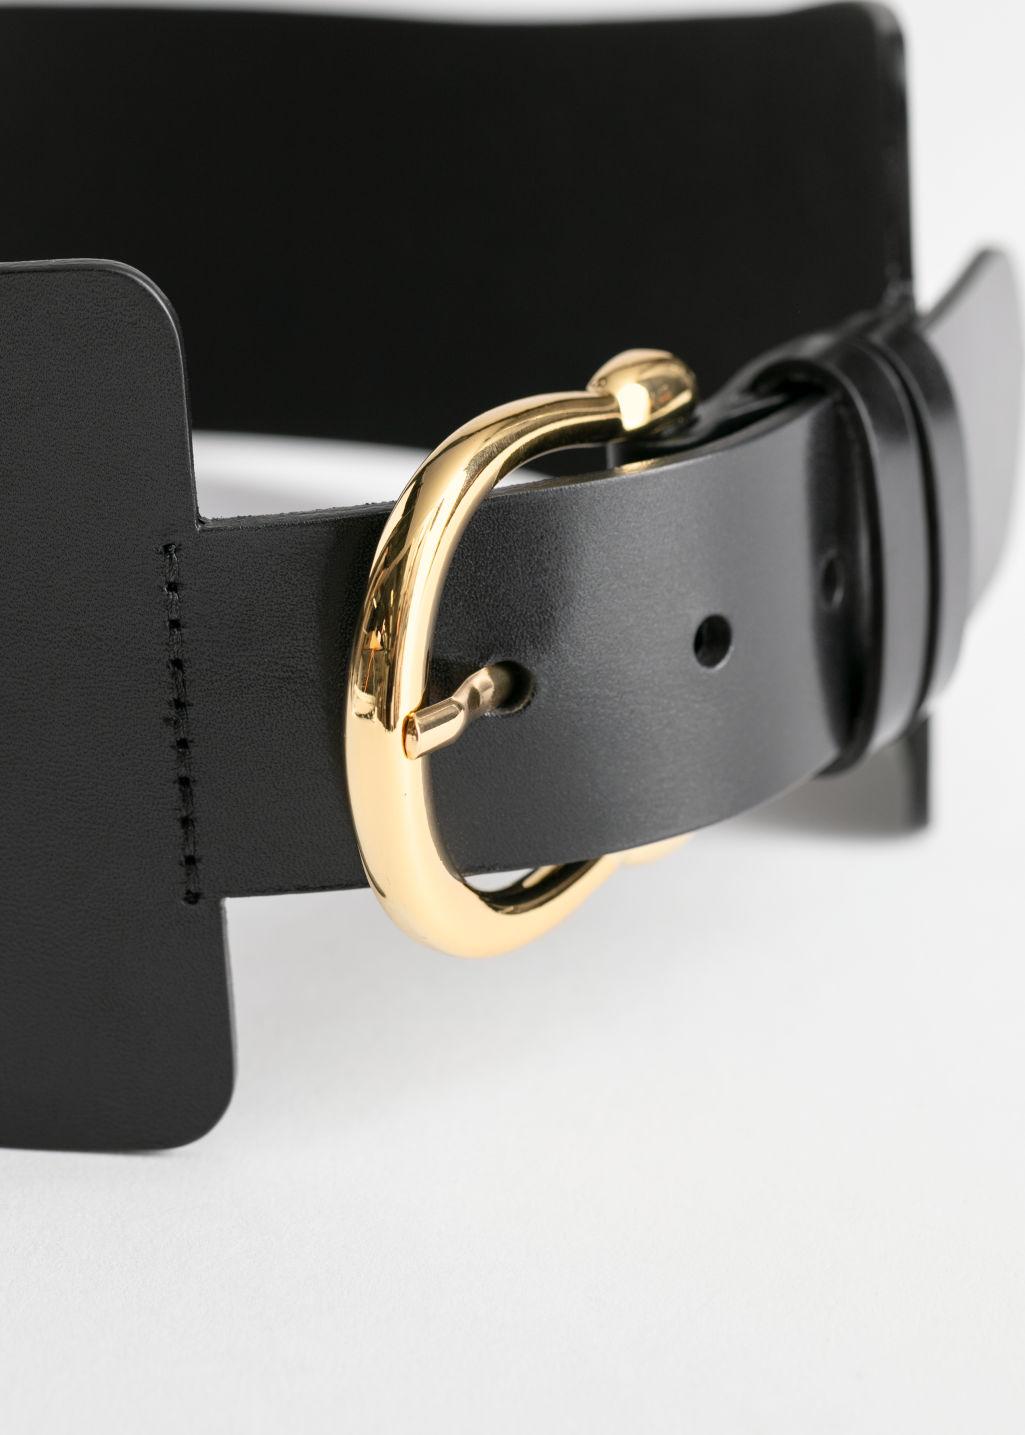 & Other Stories Leather Wide Waist Belt in Black | Lyst